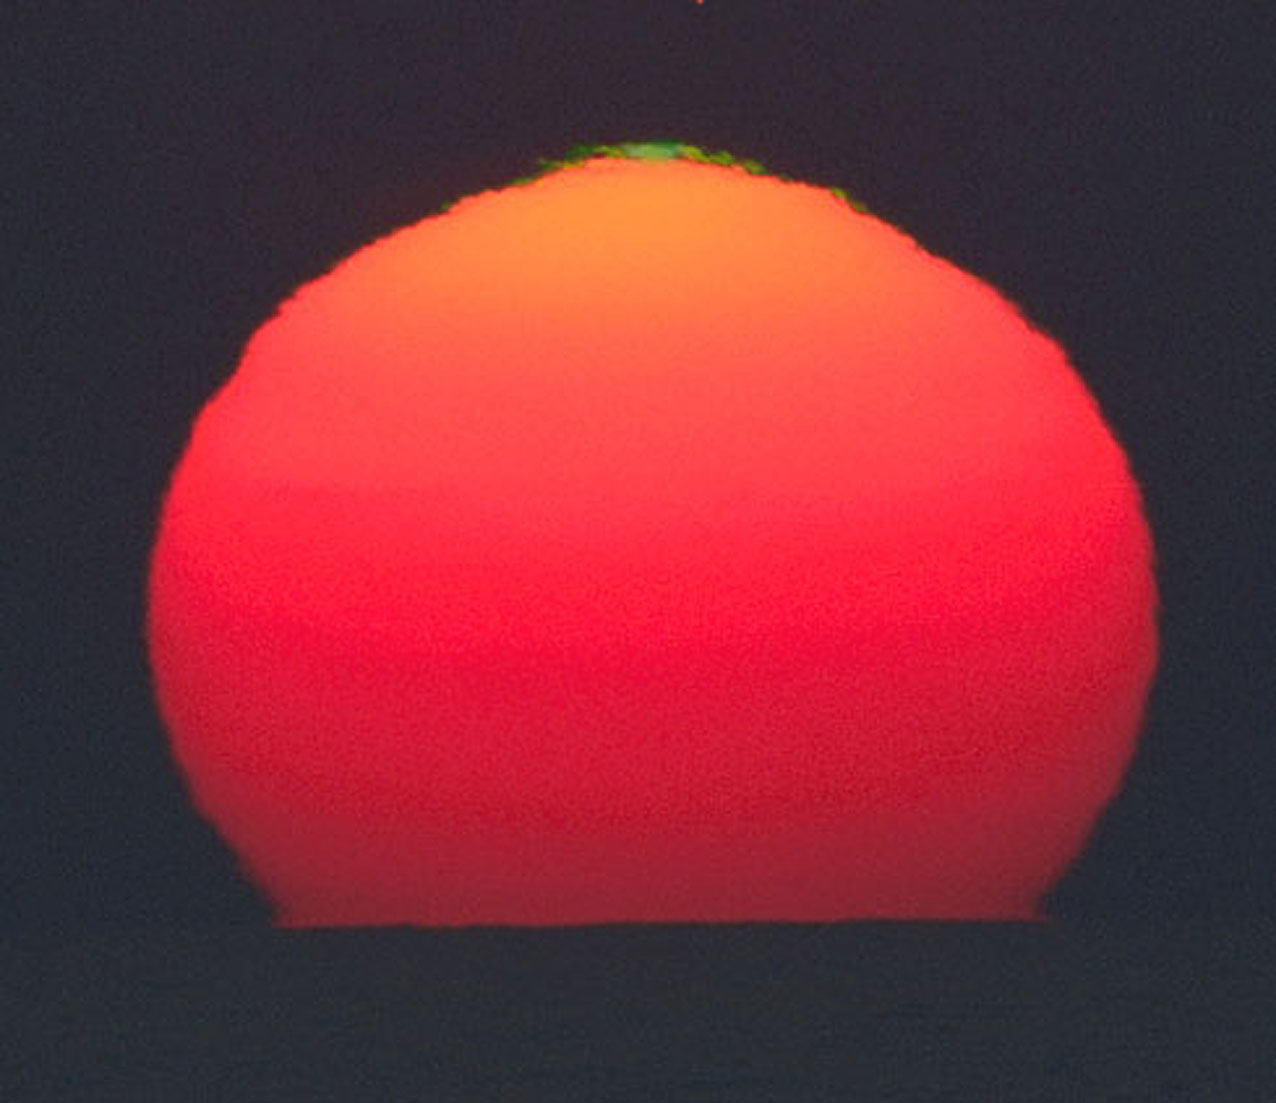 A Green Flash from the Sun